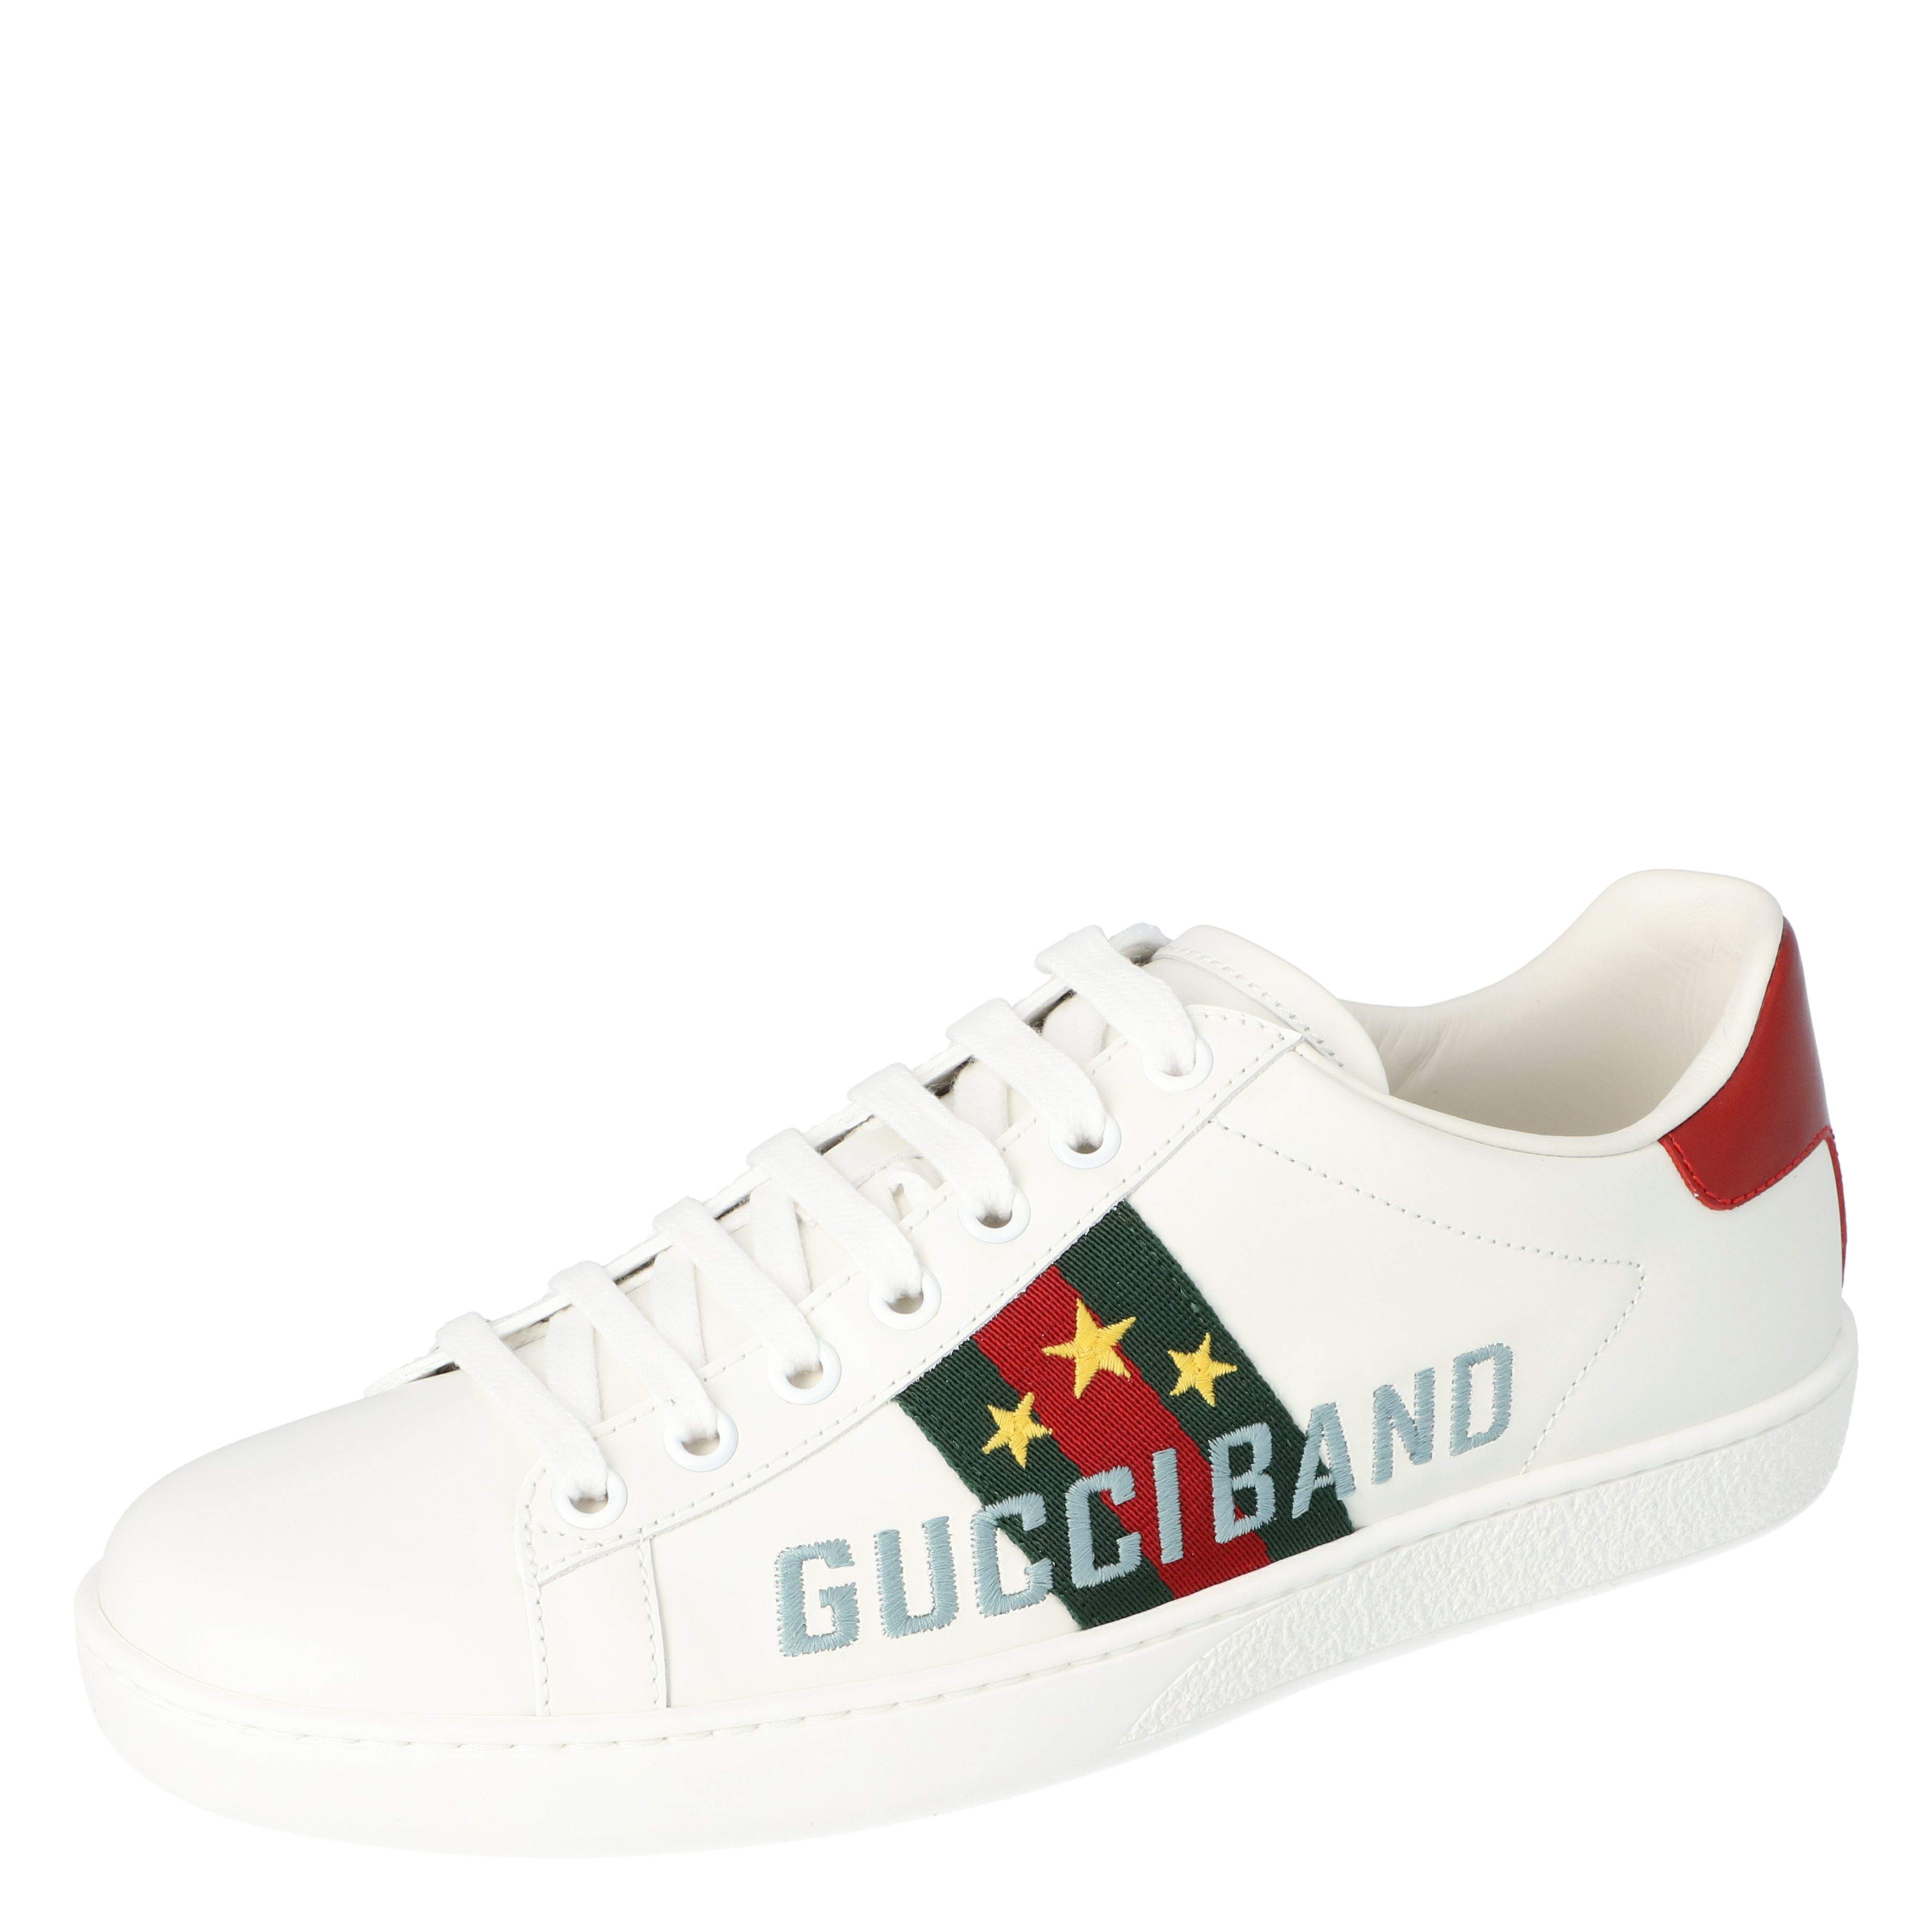 size 36 in gucci shoes